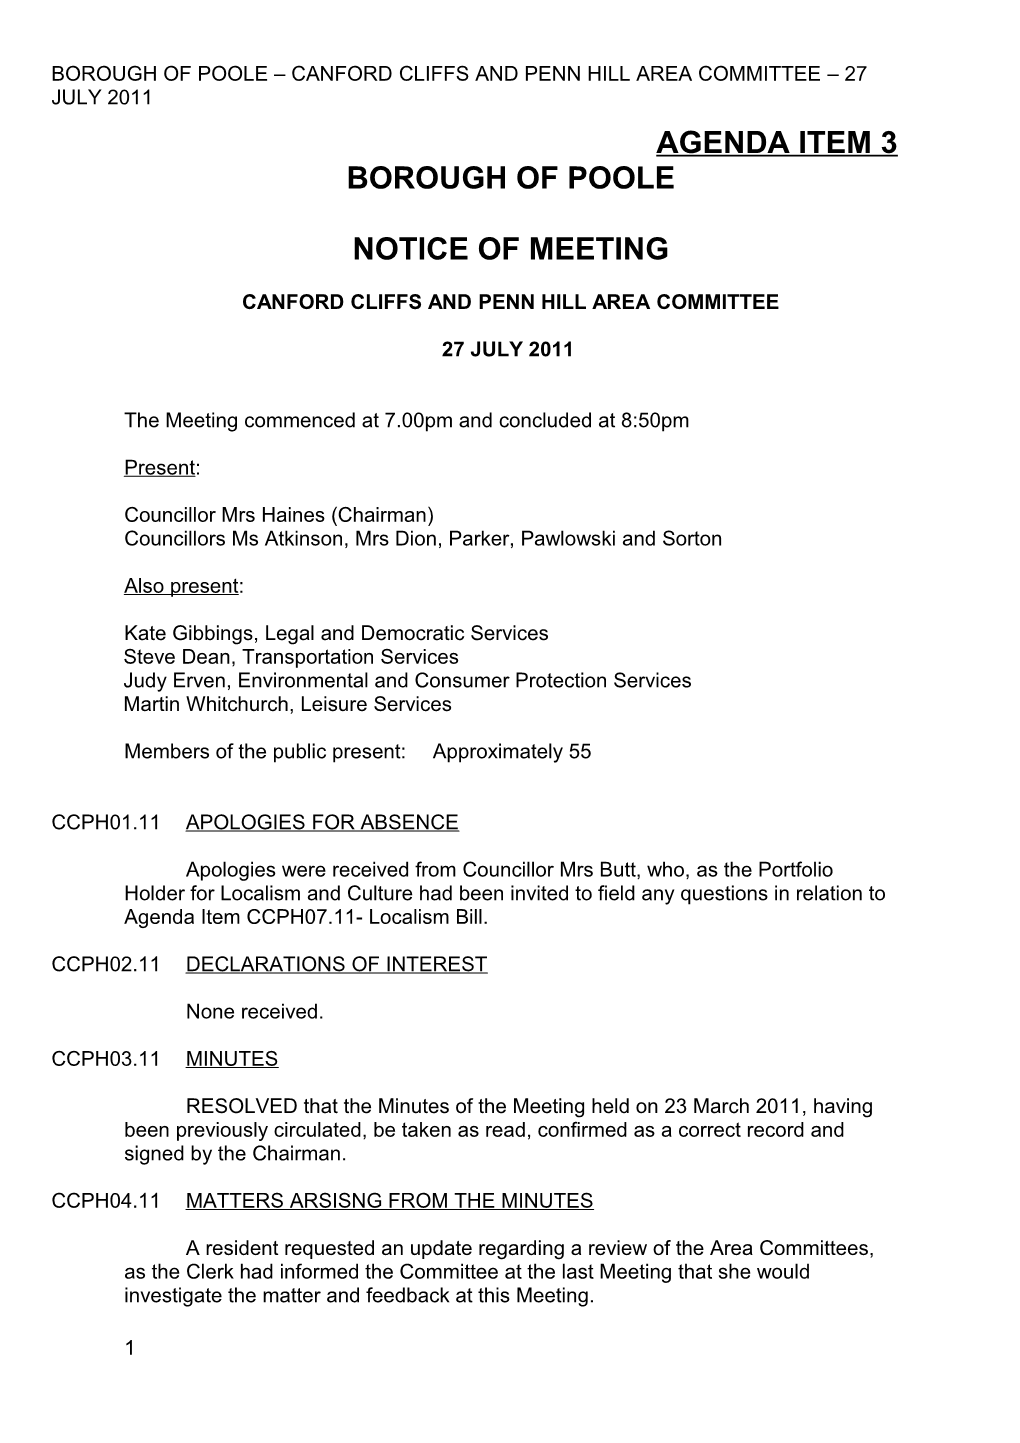 Agenda - Canford Cliffs and Penn Hill Area Committee - 23 March 2011